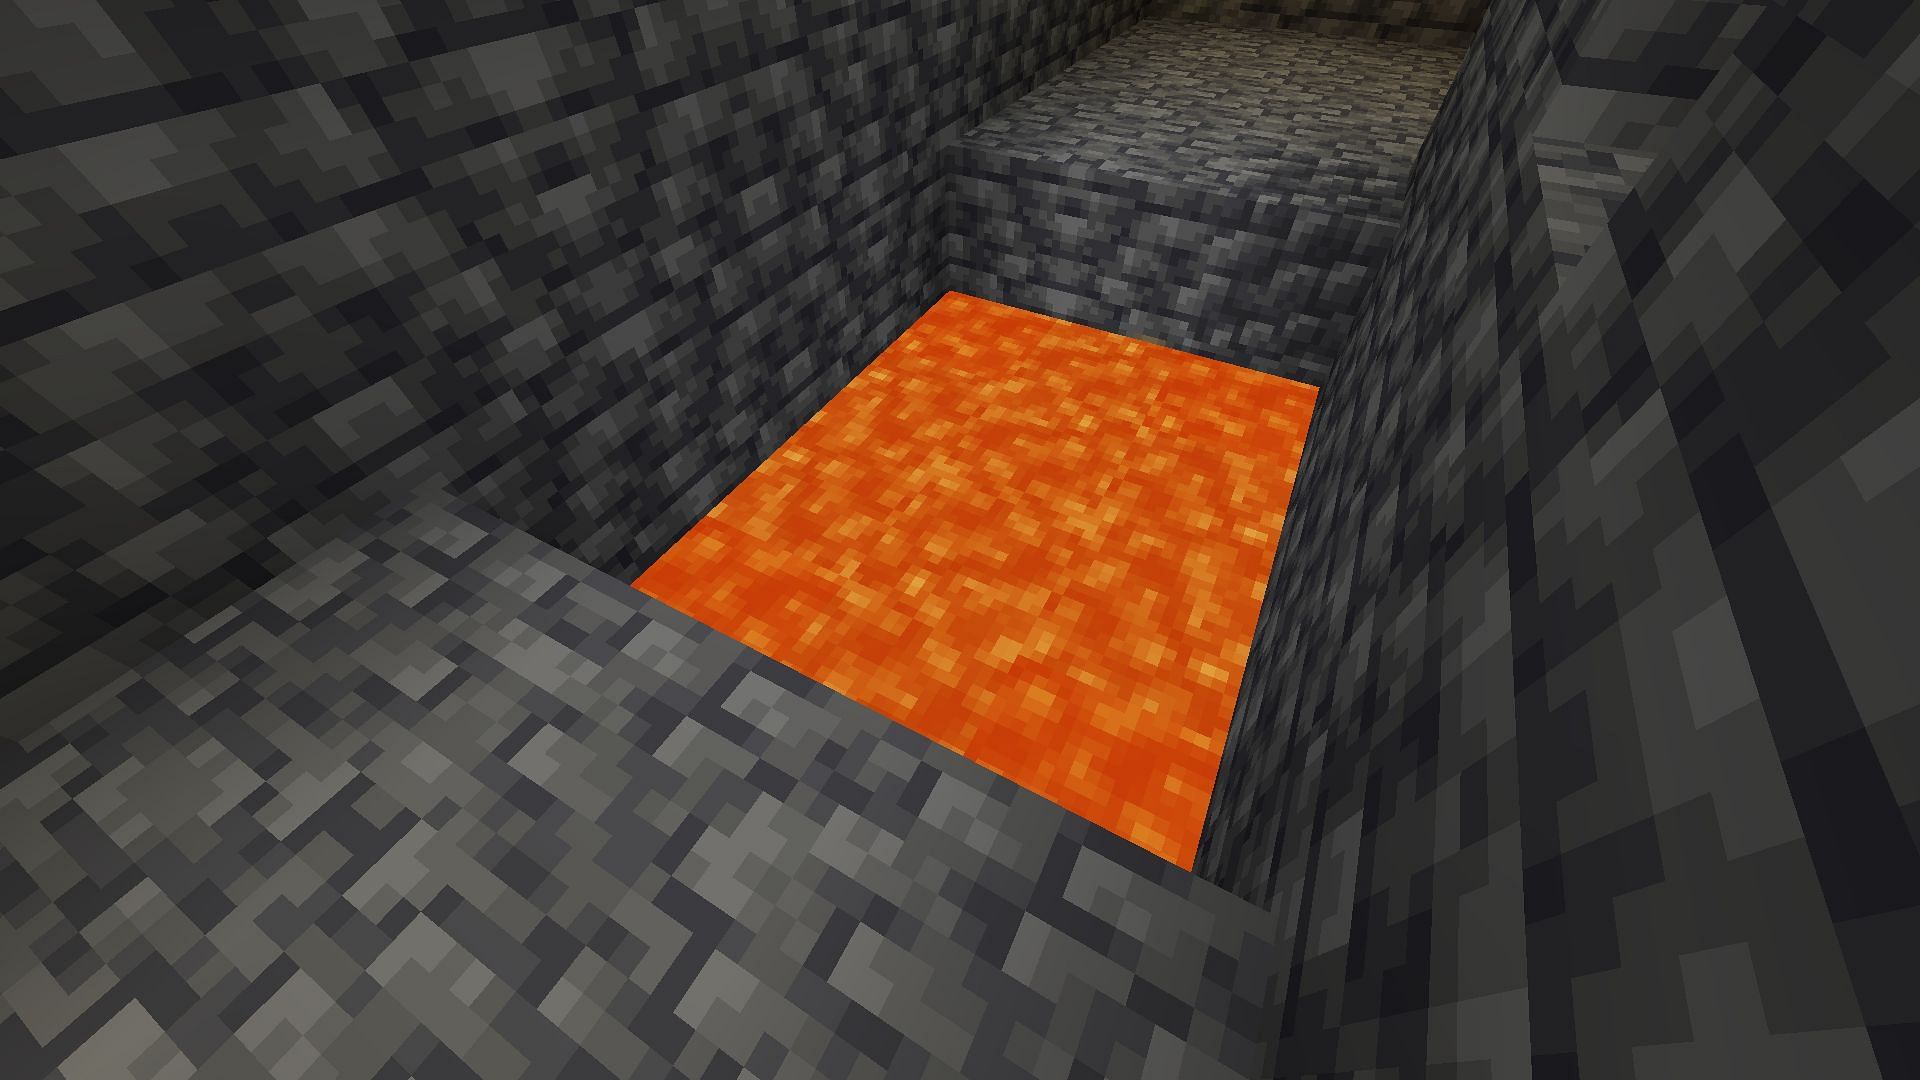 Lava can flow out and burn players while mining in Minecraft 1.20 (Image via Mojang)